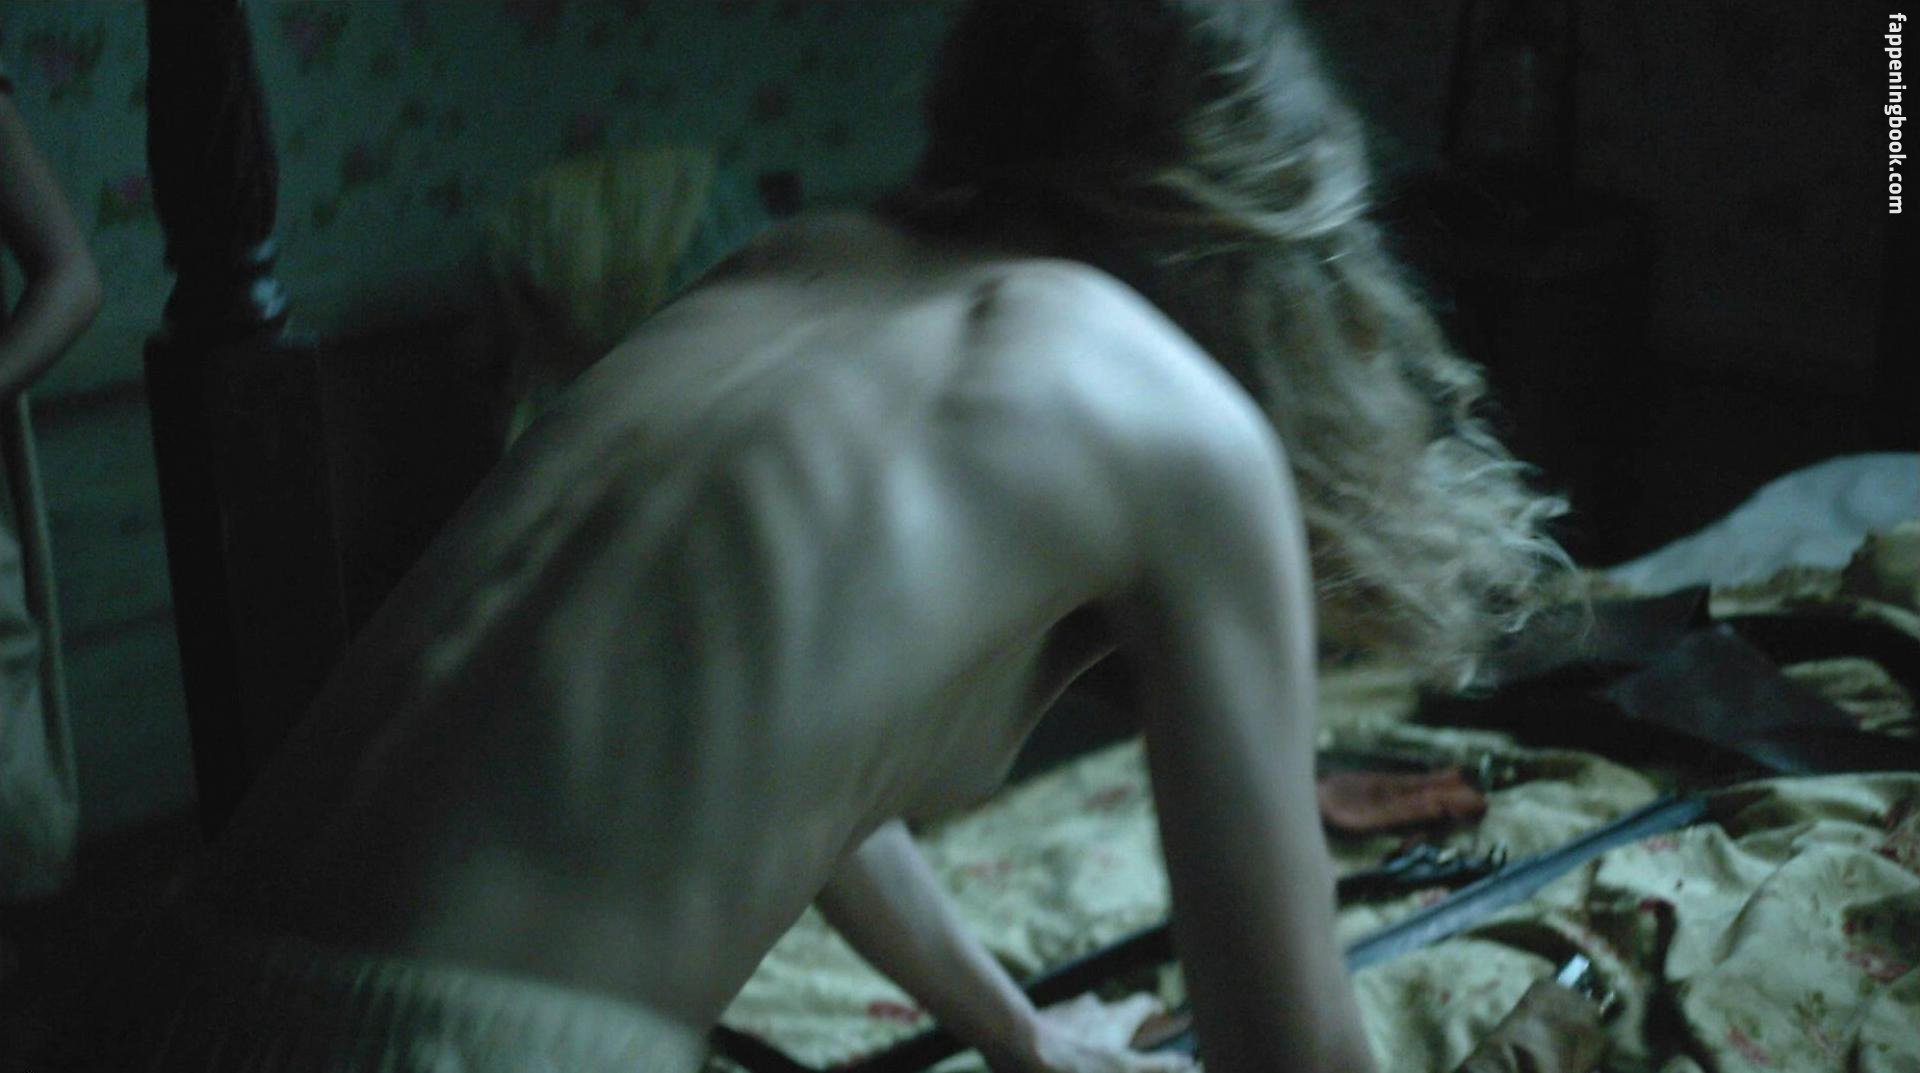 Brit Marling Nude, The Fappening - Photo #87386 - FappeningBook.